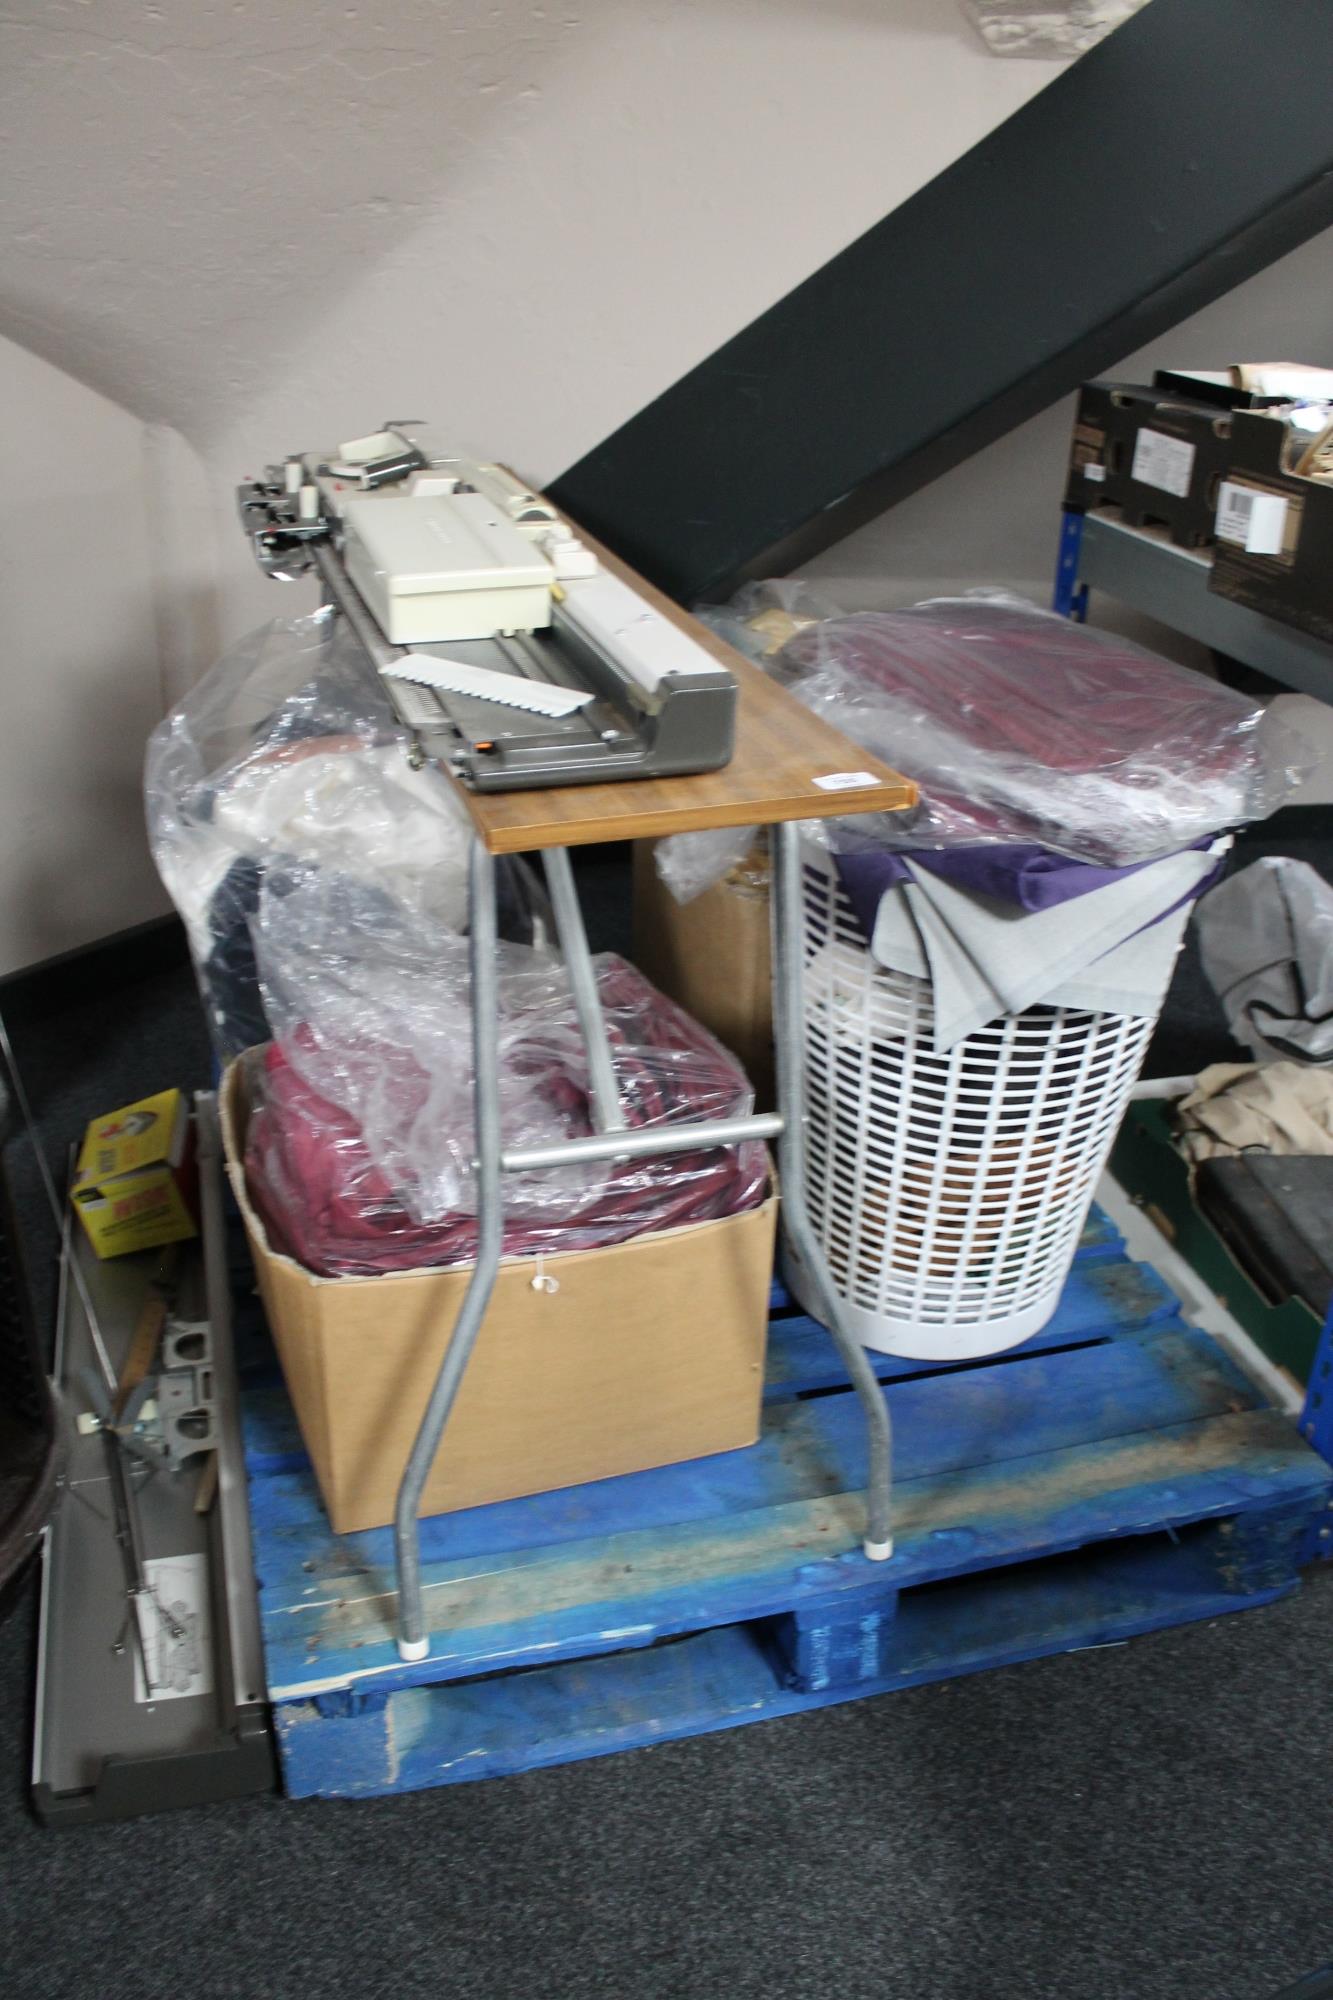 A knitting machine on stand with a quantity of material